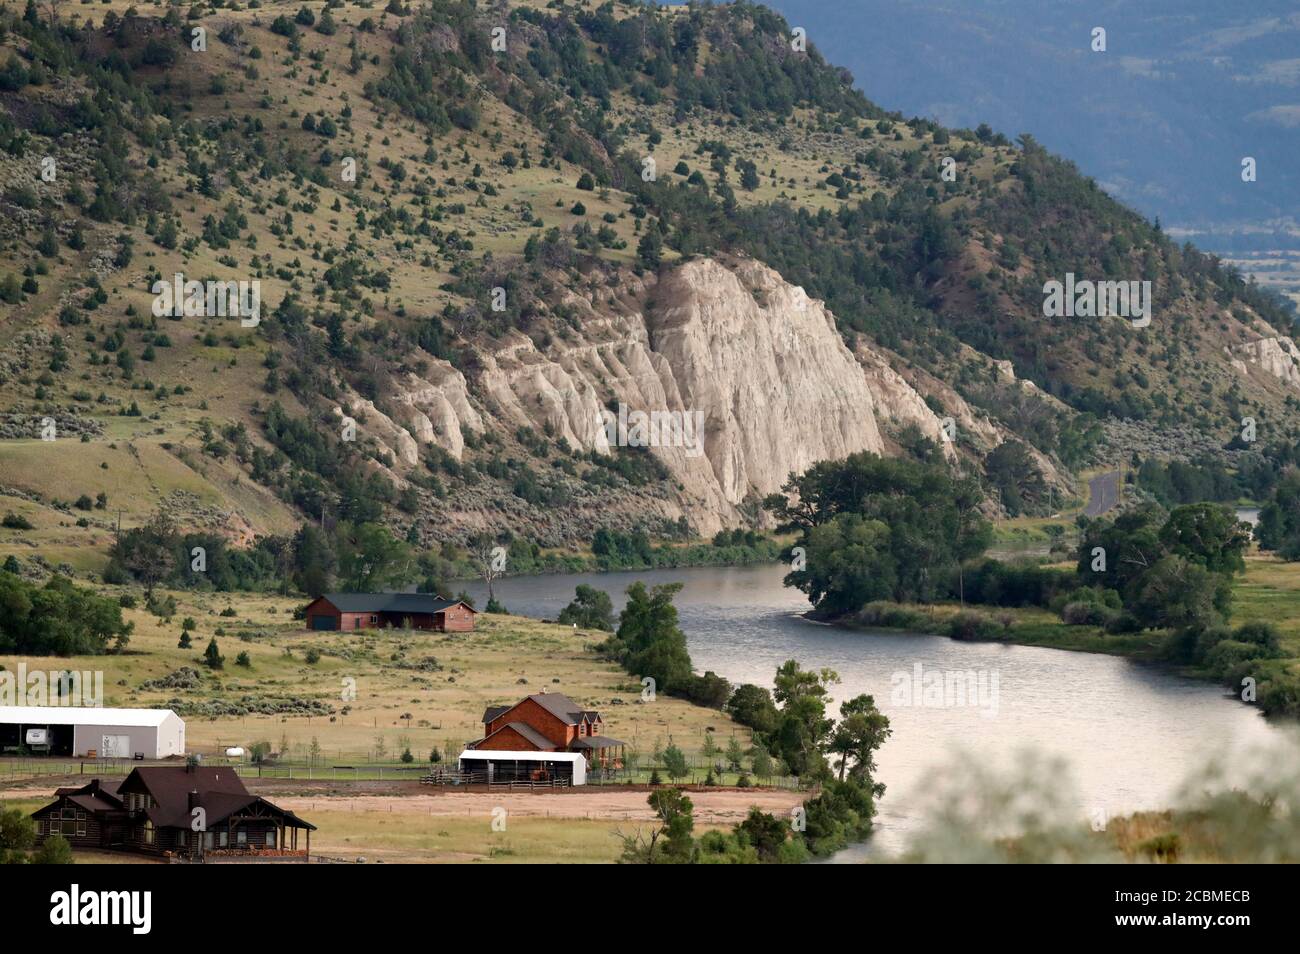 The Yellowstone River flows through Paradise Valley in Emigrant, Montana. Stock Photo